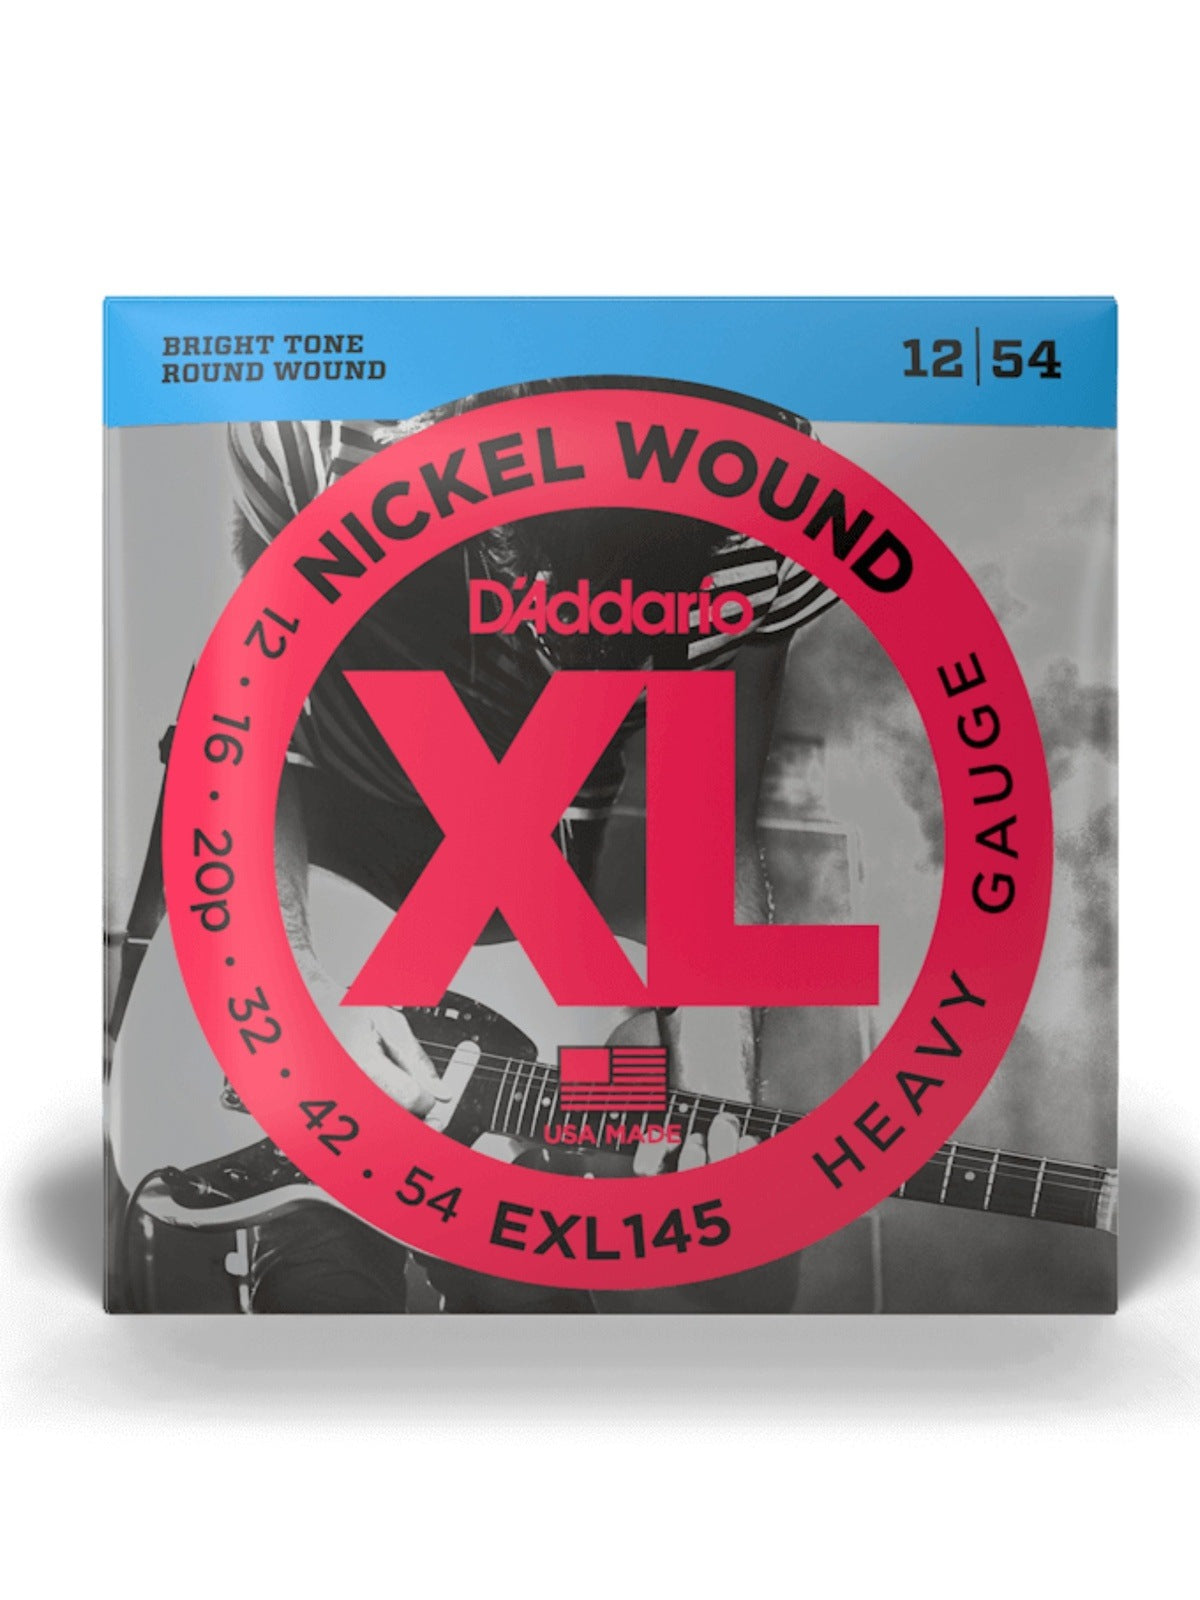 D'Addario XL Nickelwood Round Wound Electric Guitar Strings